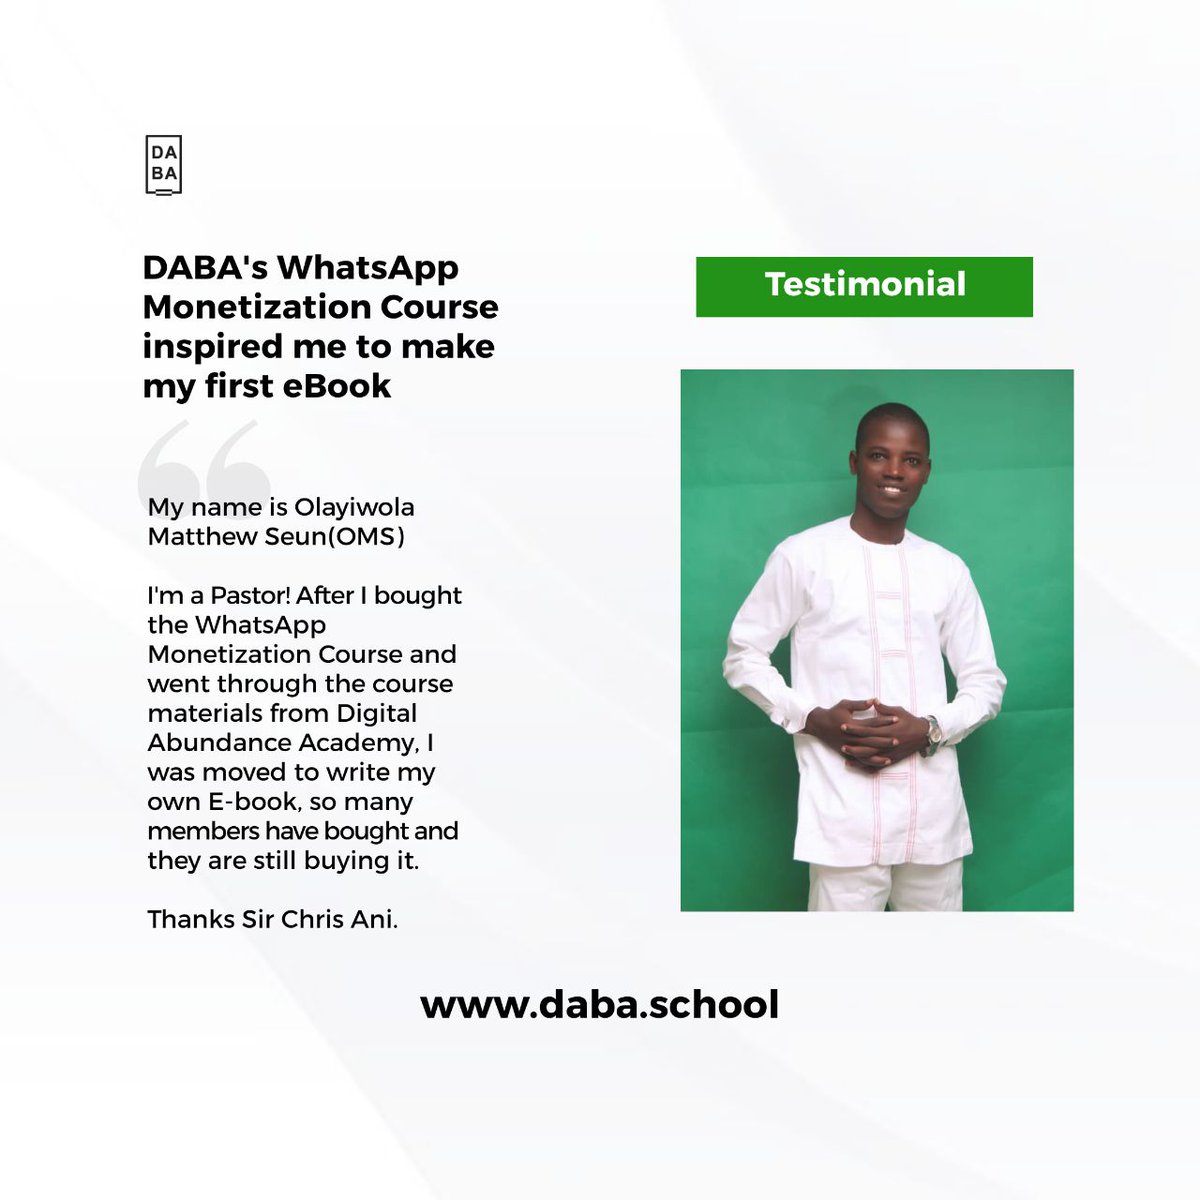 Meet Pastor Olayiwola who wrote and published his first ebook in less than one week after taking the whatsapp monetization course on  http://daba.school  He has been making money weekly with the book,, you realy need to hear how that book sales has helped his finances.